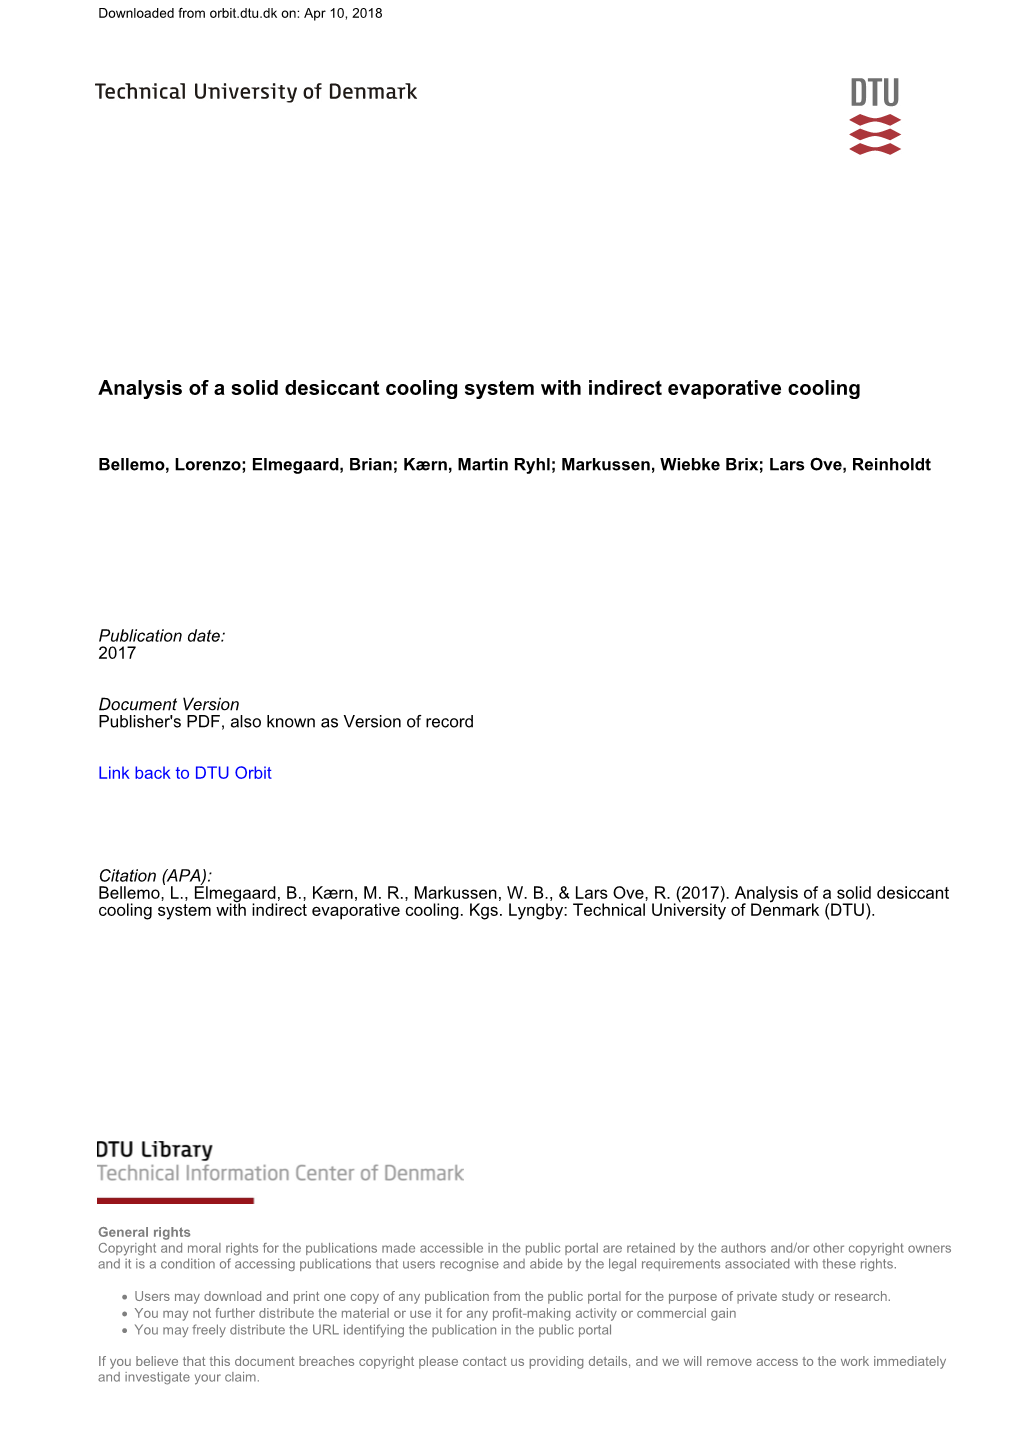 Analysis of a Solid Desiccant Cooling System with Indirect Evaporative Cooling